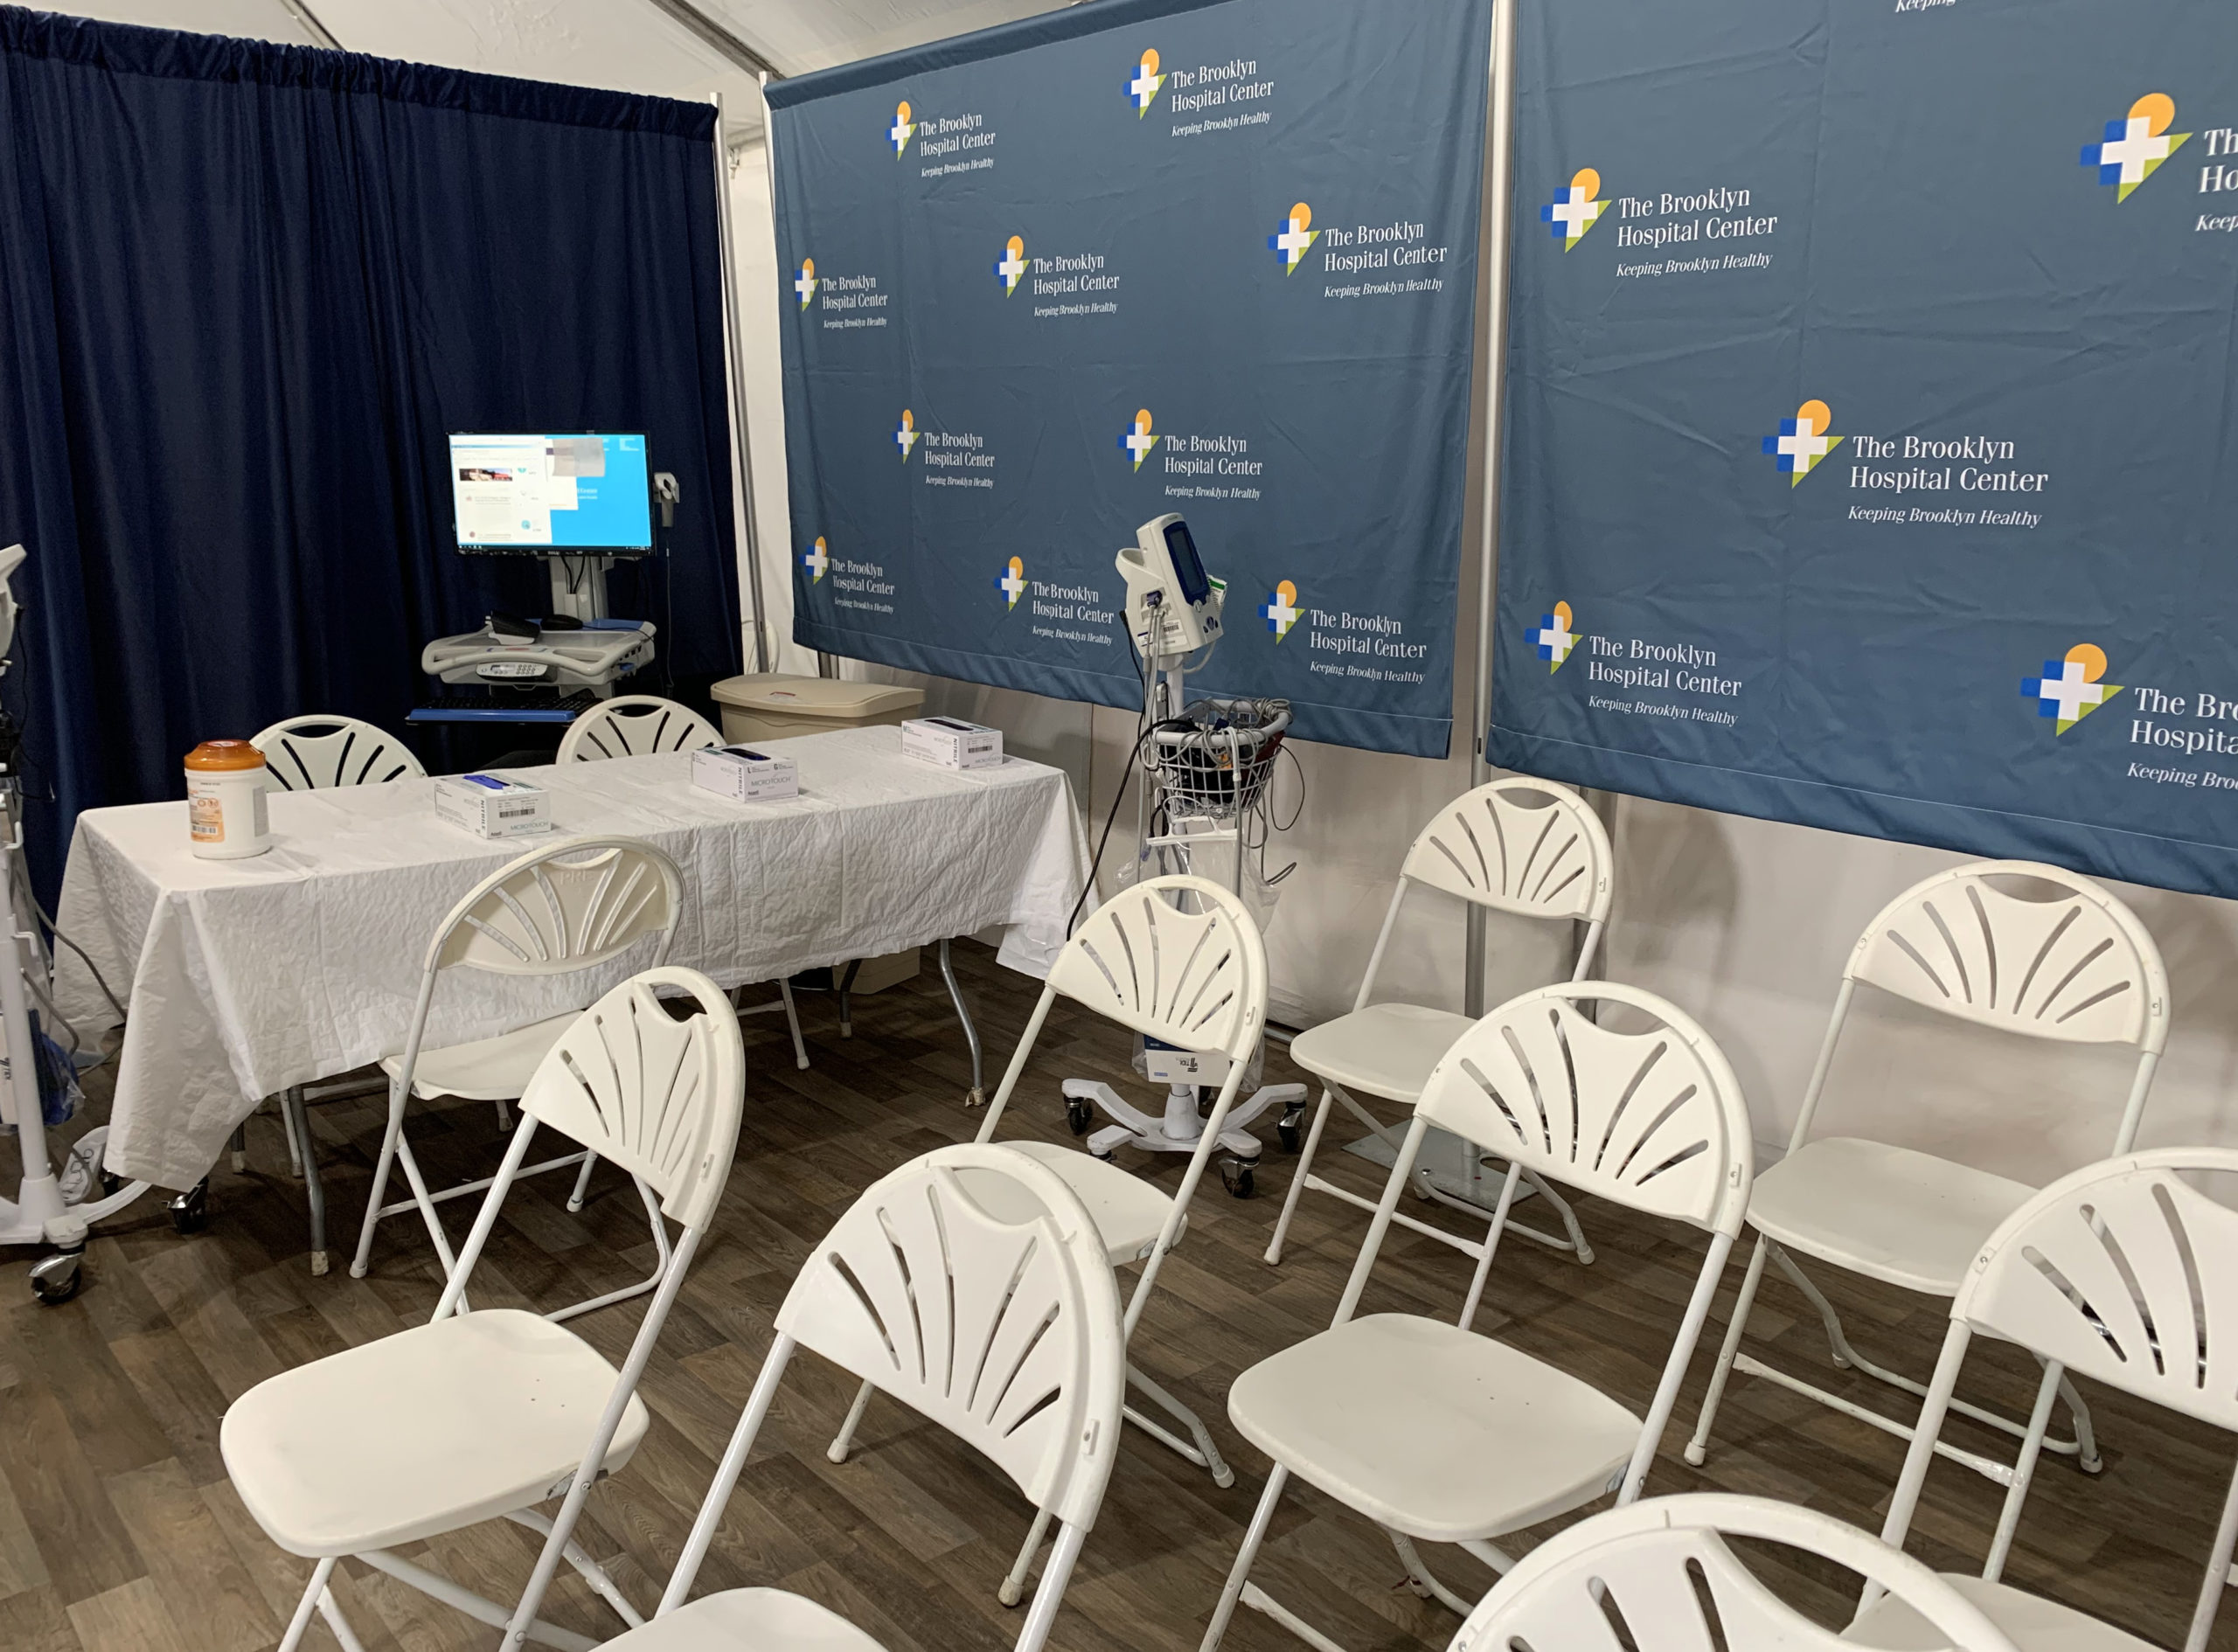 Brooklyn Borough President Eric Adams unveiled a new on-site tent facility at Brooklyn Hospital Center on Tuesday to screen patients who believe they have COVID-19. Photo: Mary Frost